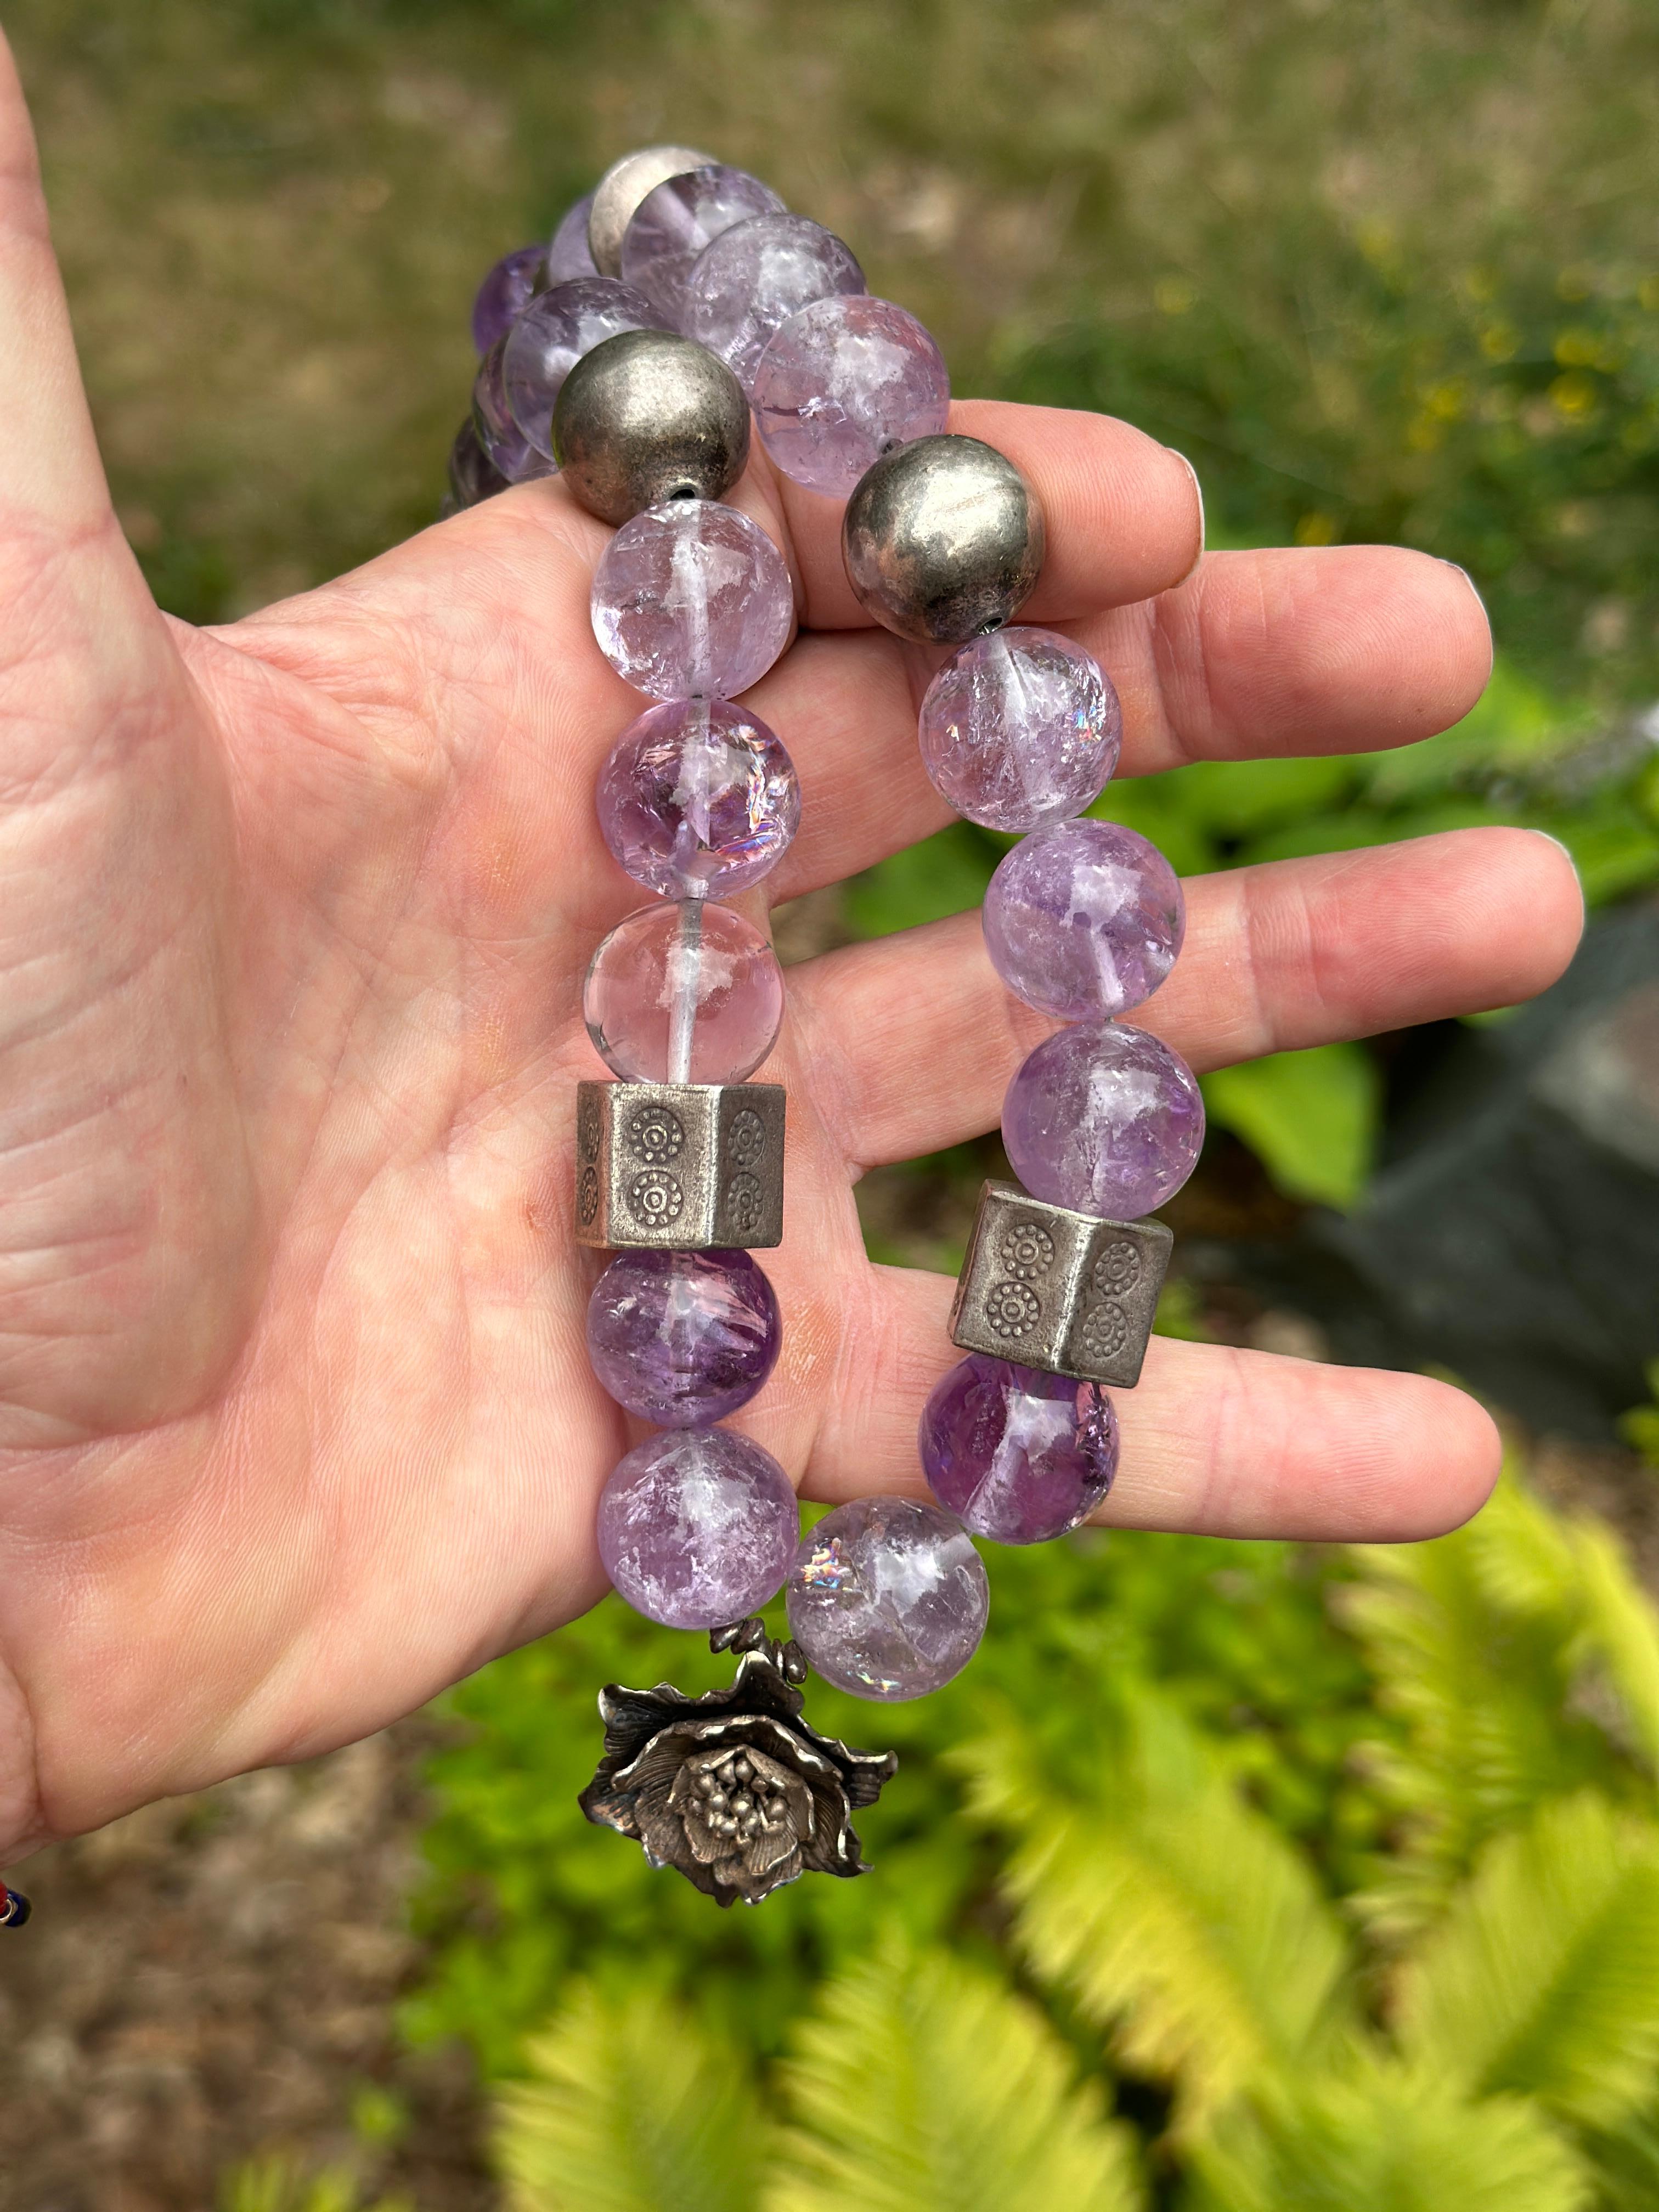 This is a fabulous 21 inch 18mm Amethyst Bead Necklace with engraved Sterling Silver beads and clasp.  The monumental amethyst necklace is a masterwork of Mid-Century design.  The magnificent 3/4 inch (18mm) large natural Amethyst beads are some of